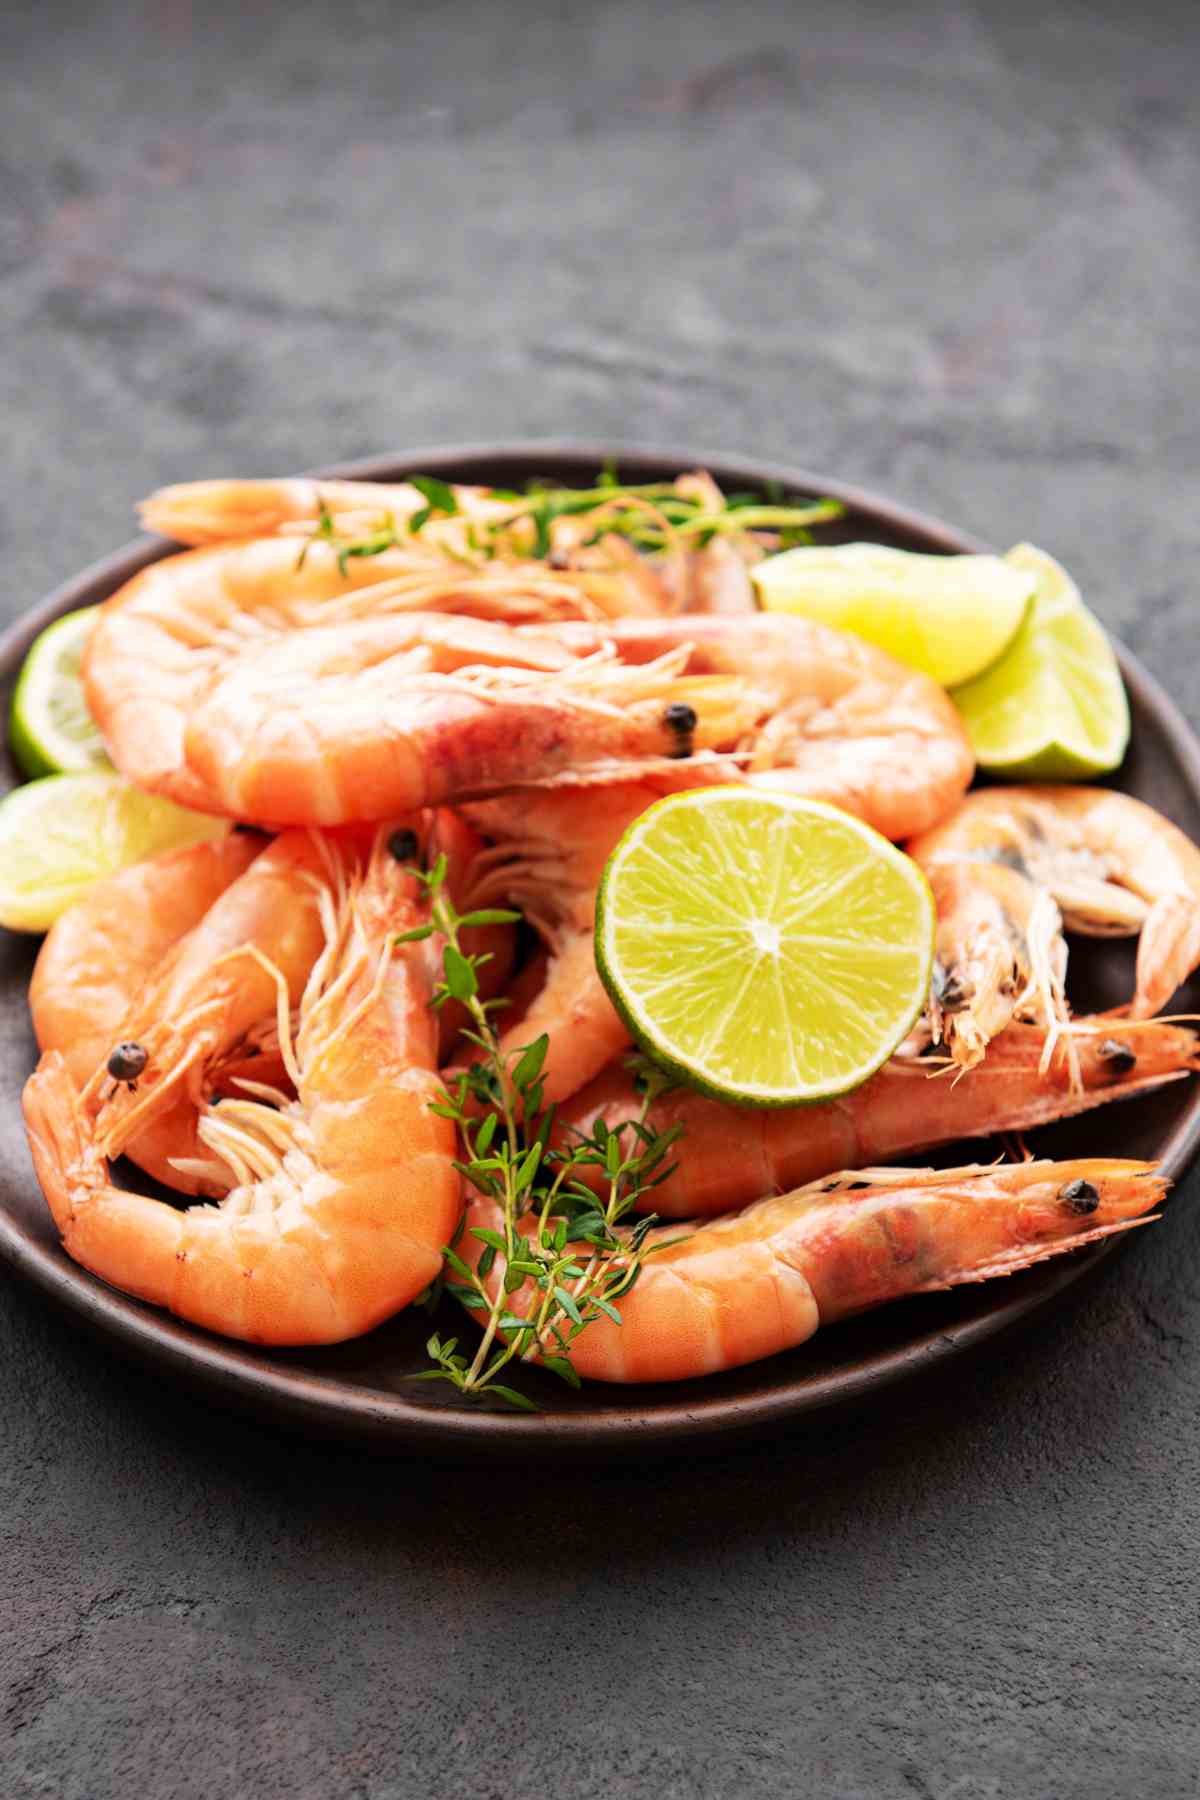 Properly cooked shrimp is succulent, juicy, and tender. However, overcooked shrimp is rubbery and unappetizing. Measuring shrimp’s internal temperature will help determine if it’s cooked properly. In this post, you’ll learn how to measure its internal temperature in addition to other tips.